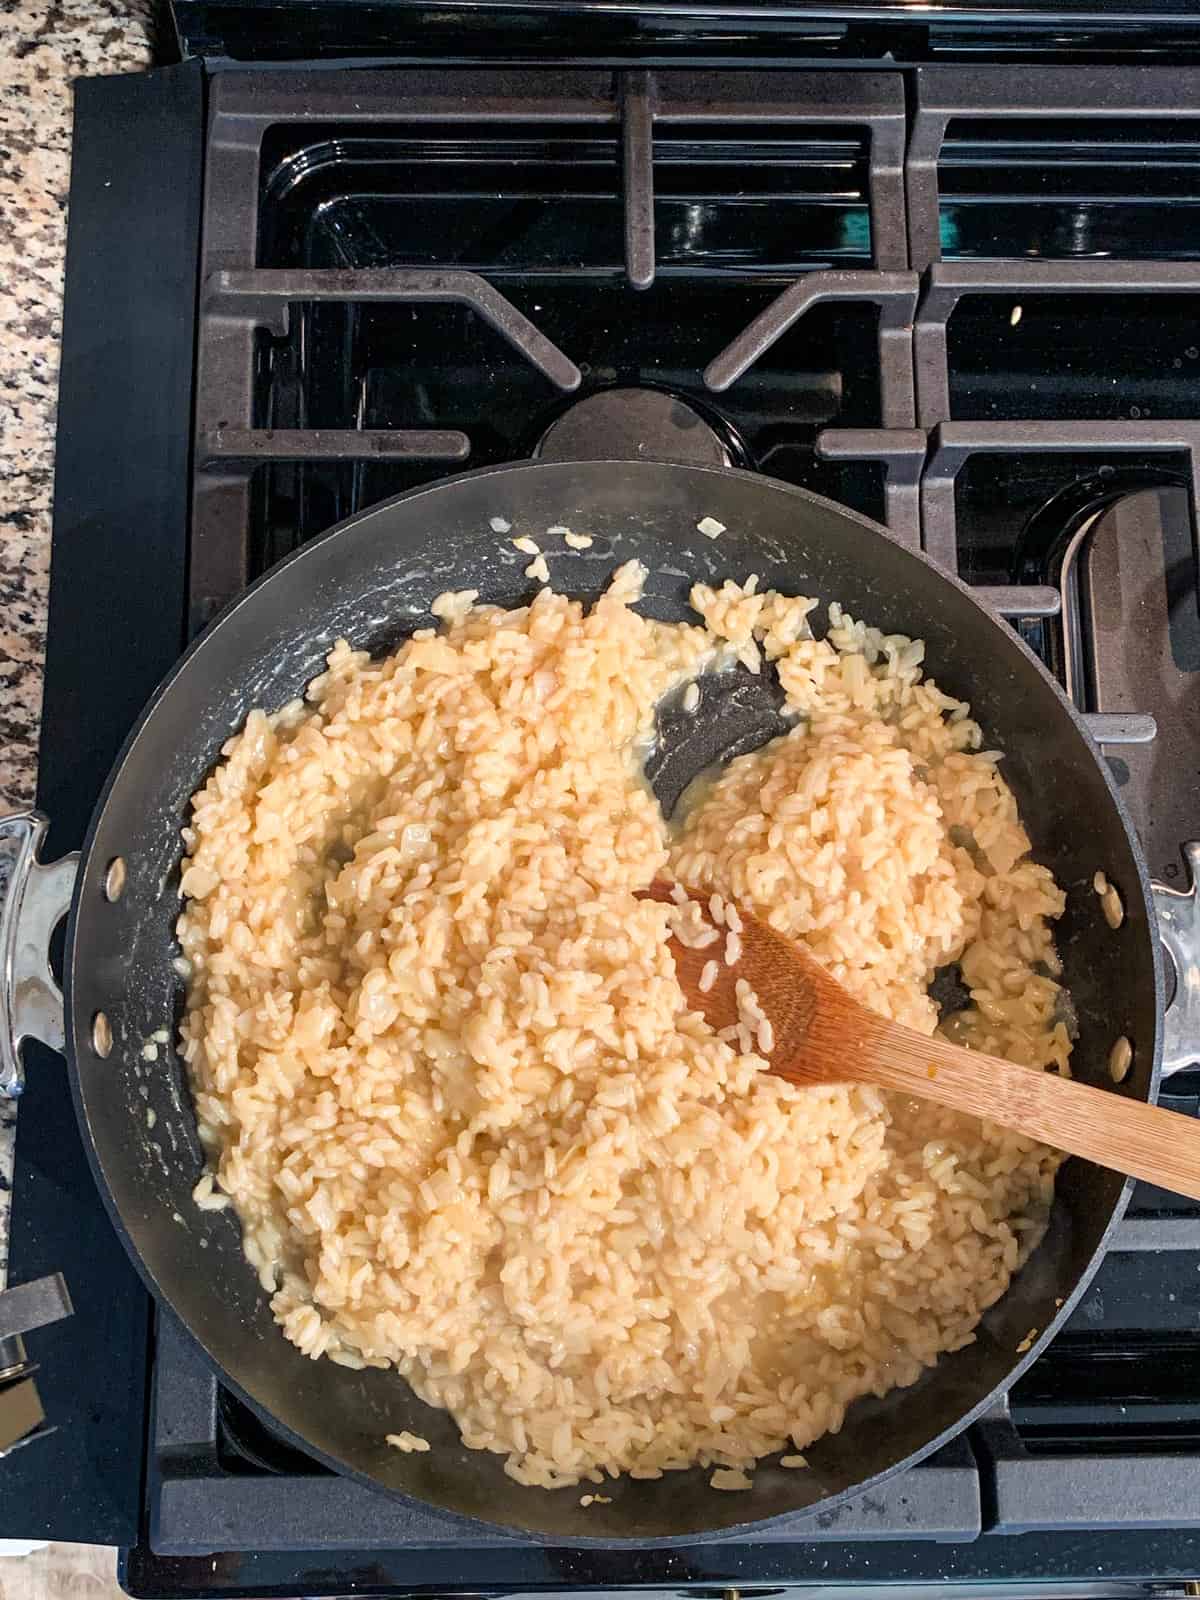 Wooden spoon stirring creamy risotto in a skillet.